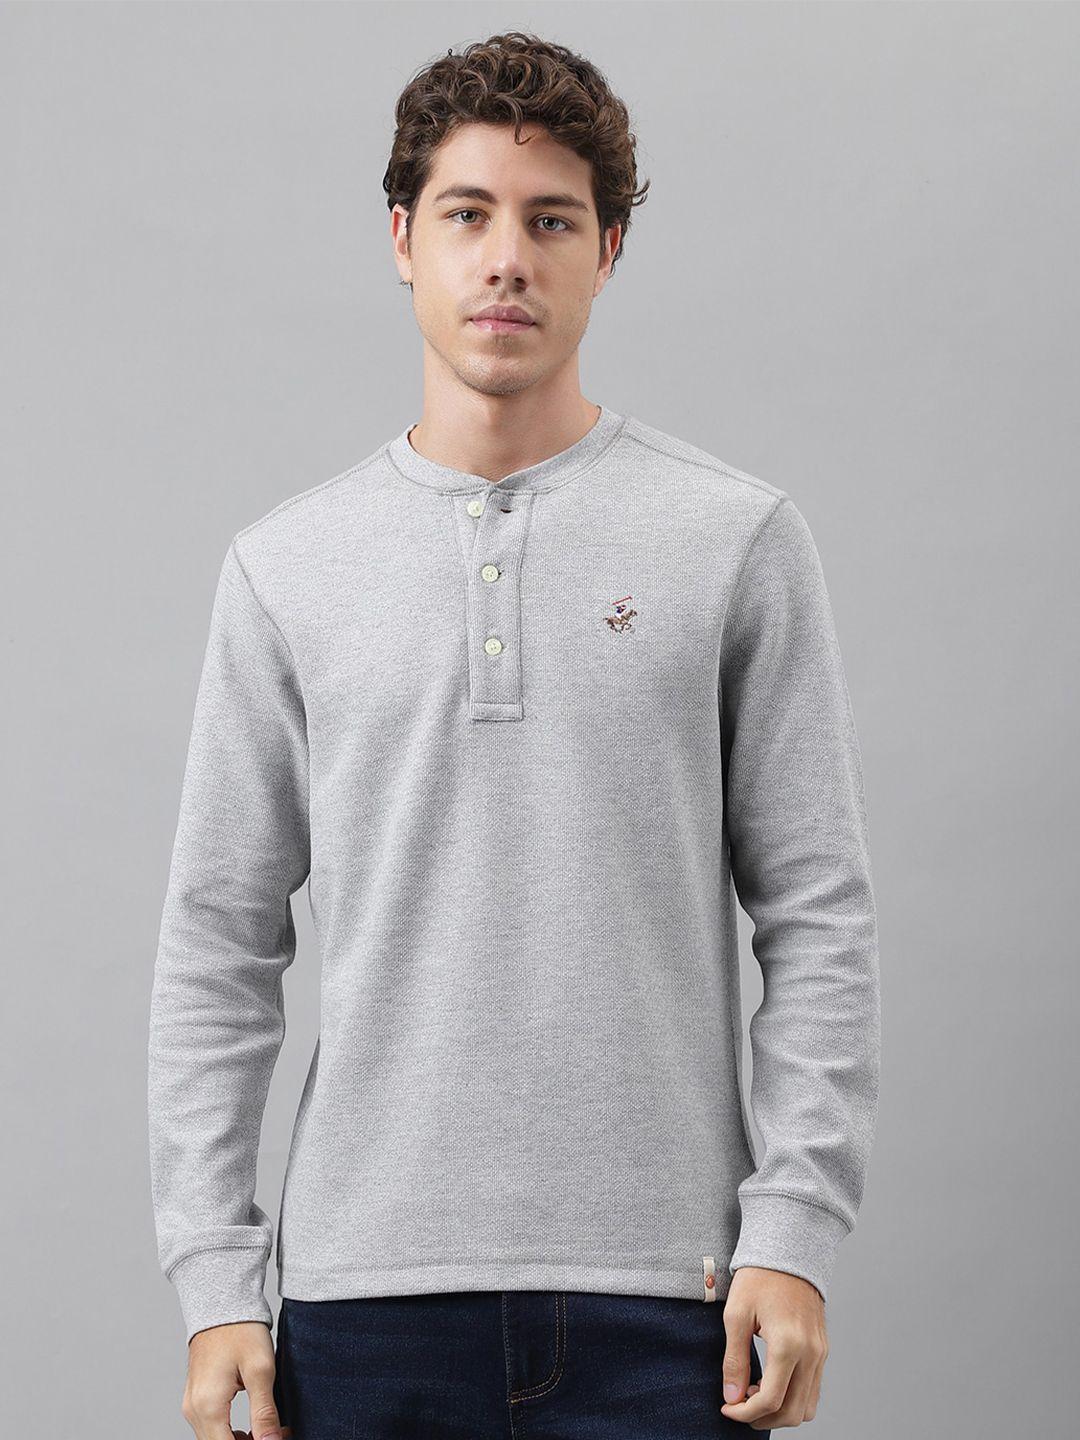 beverly-hills-polo-club-henley-neck-pure-cotton-t-shirt